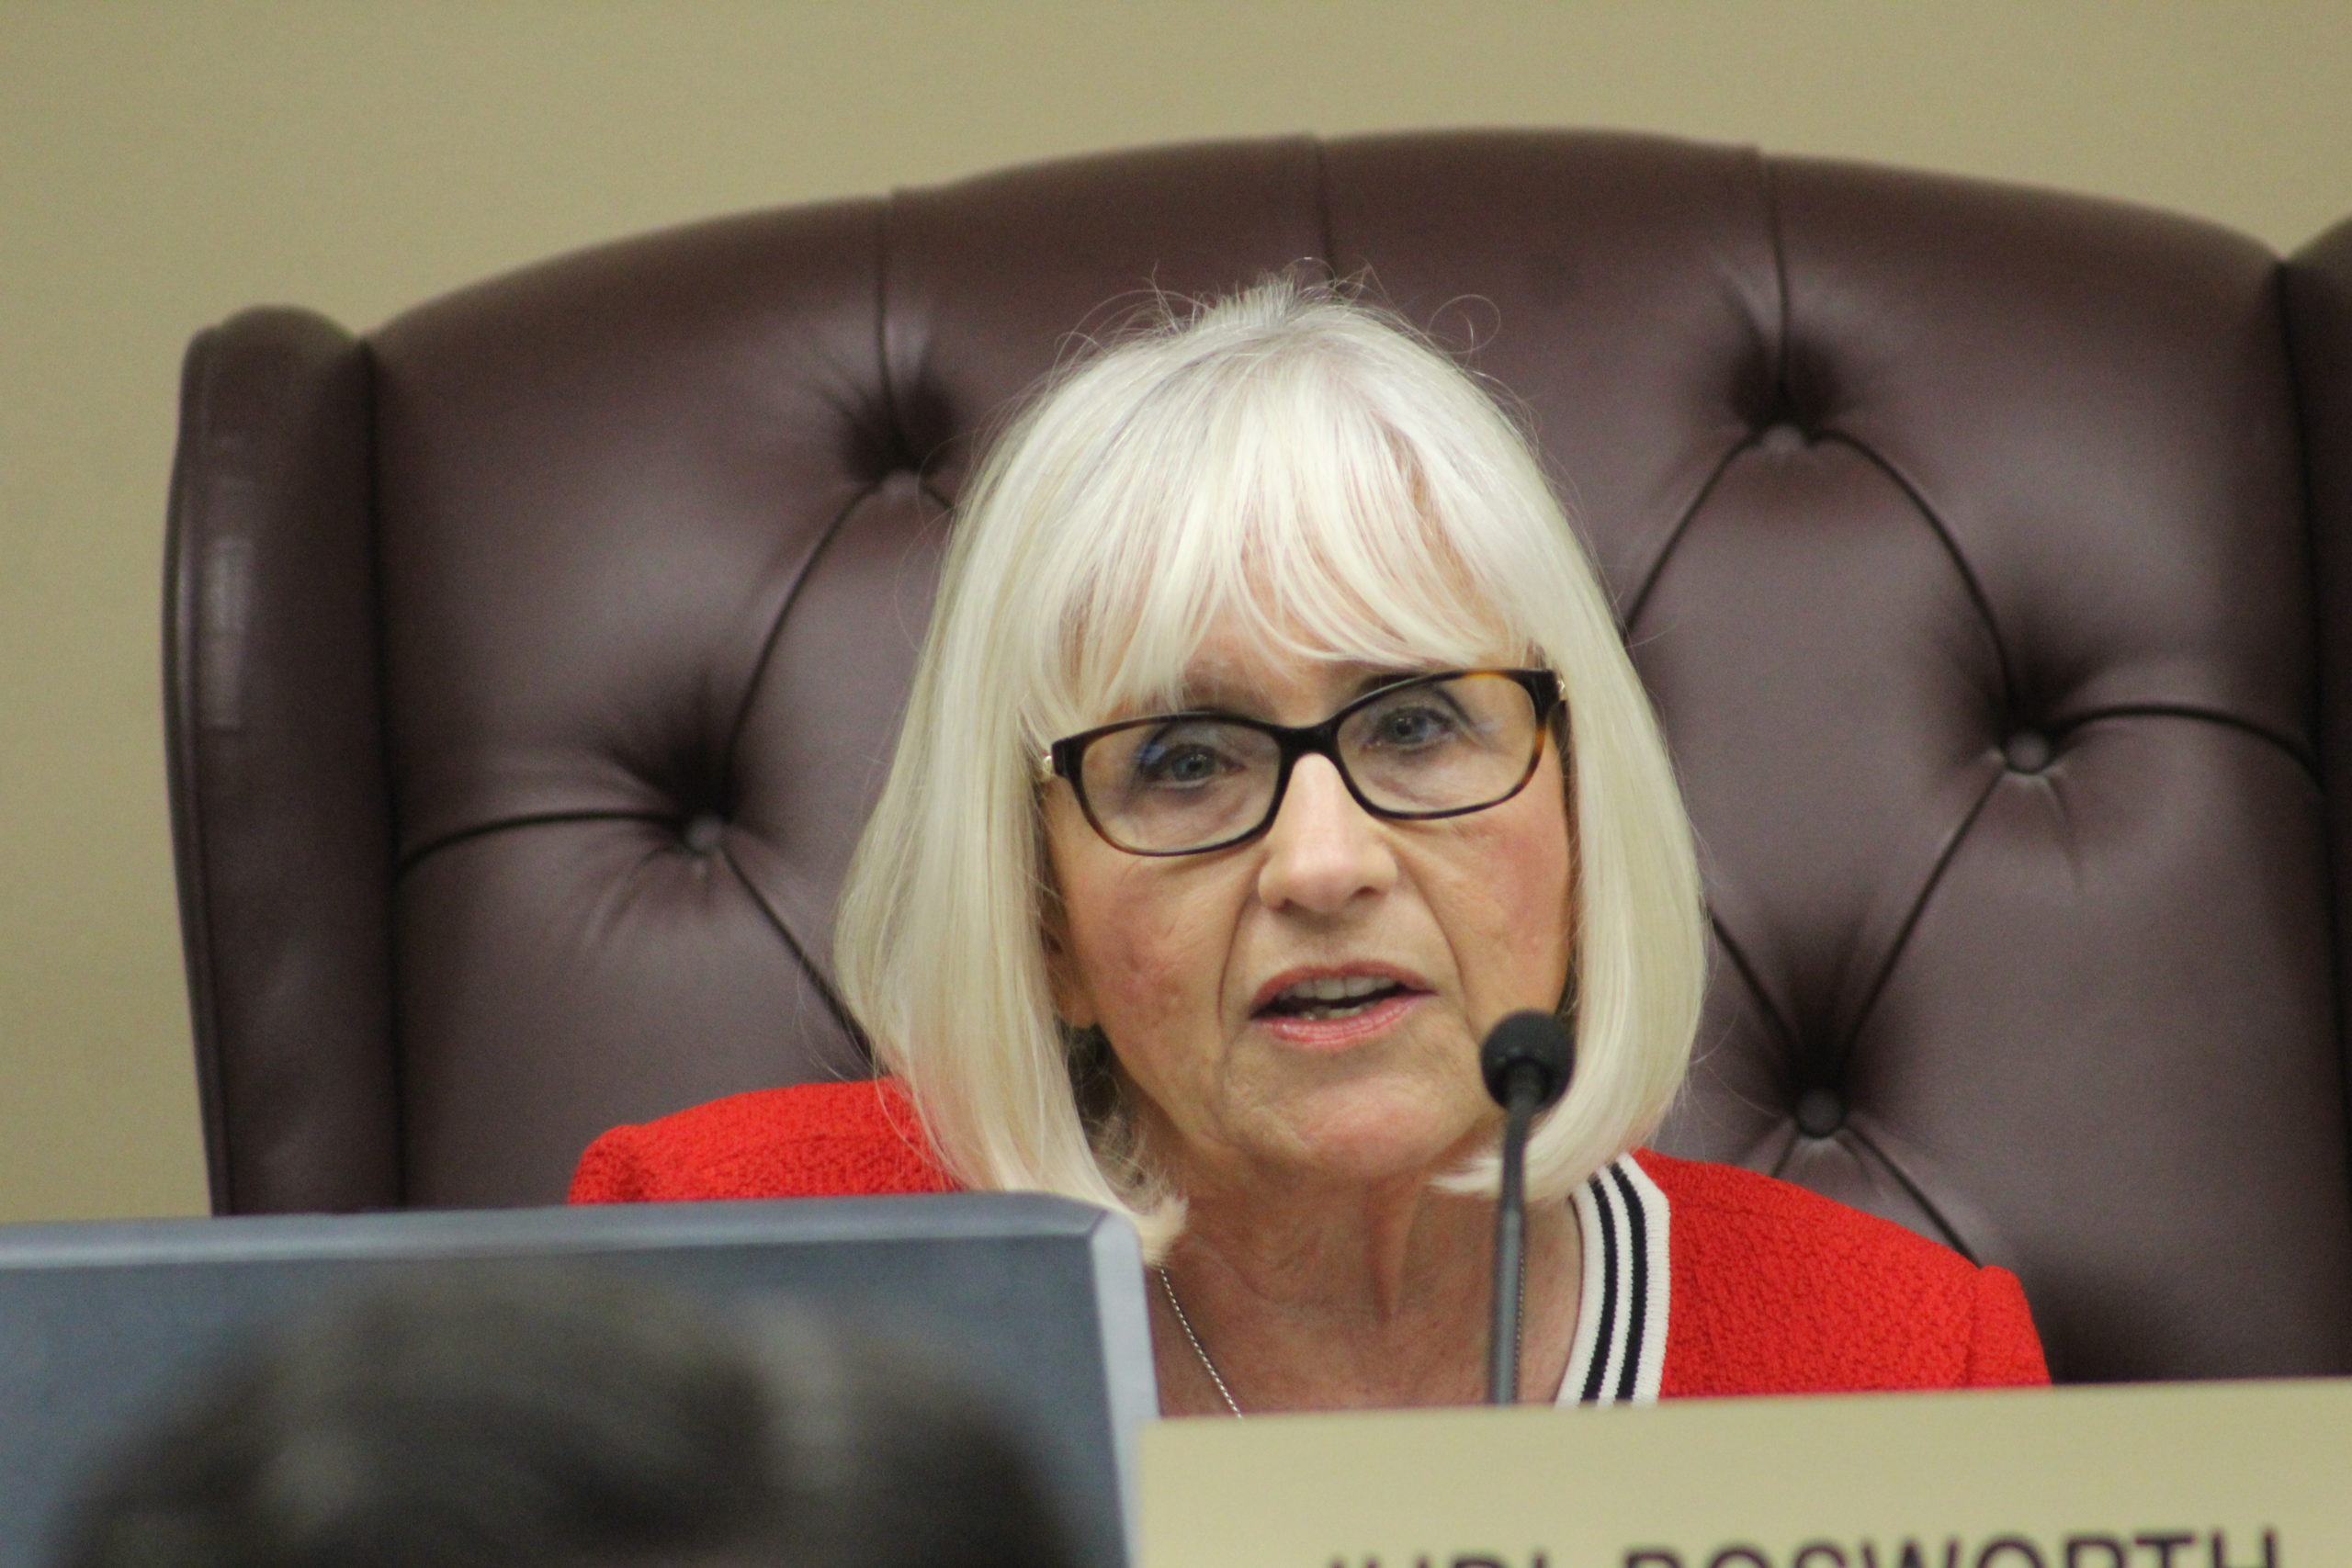 North Hempstead Town Supervisor Judi Bosworth, as seen at a previous meeting, spoke about the proposed 2019 budget on Thursday. (Photo by Rebecca Klar)